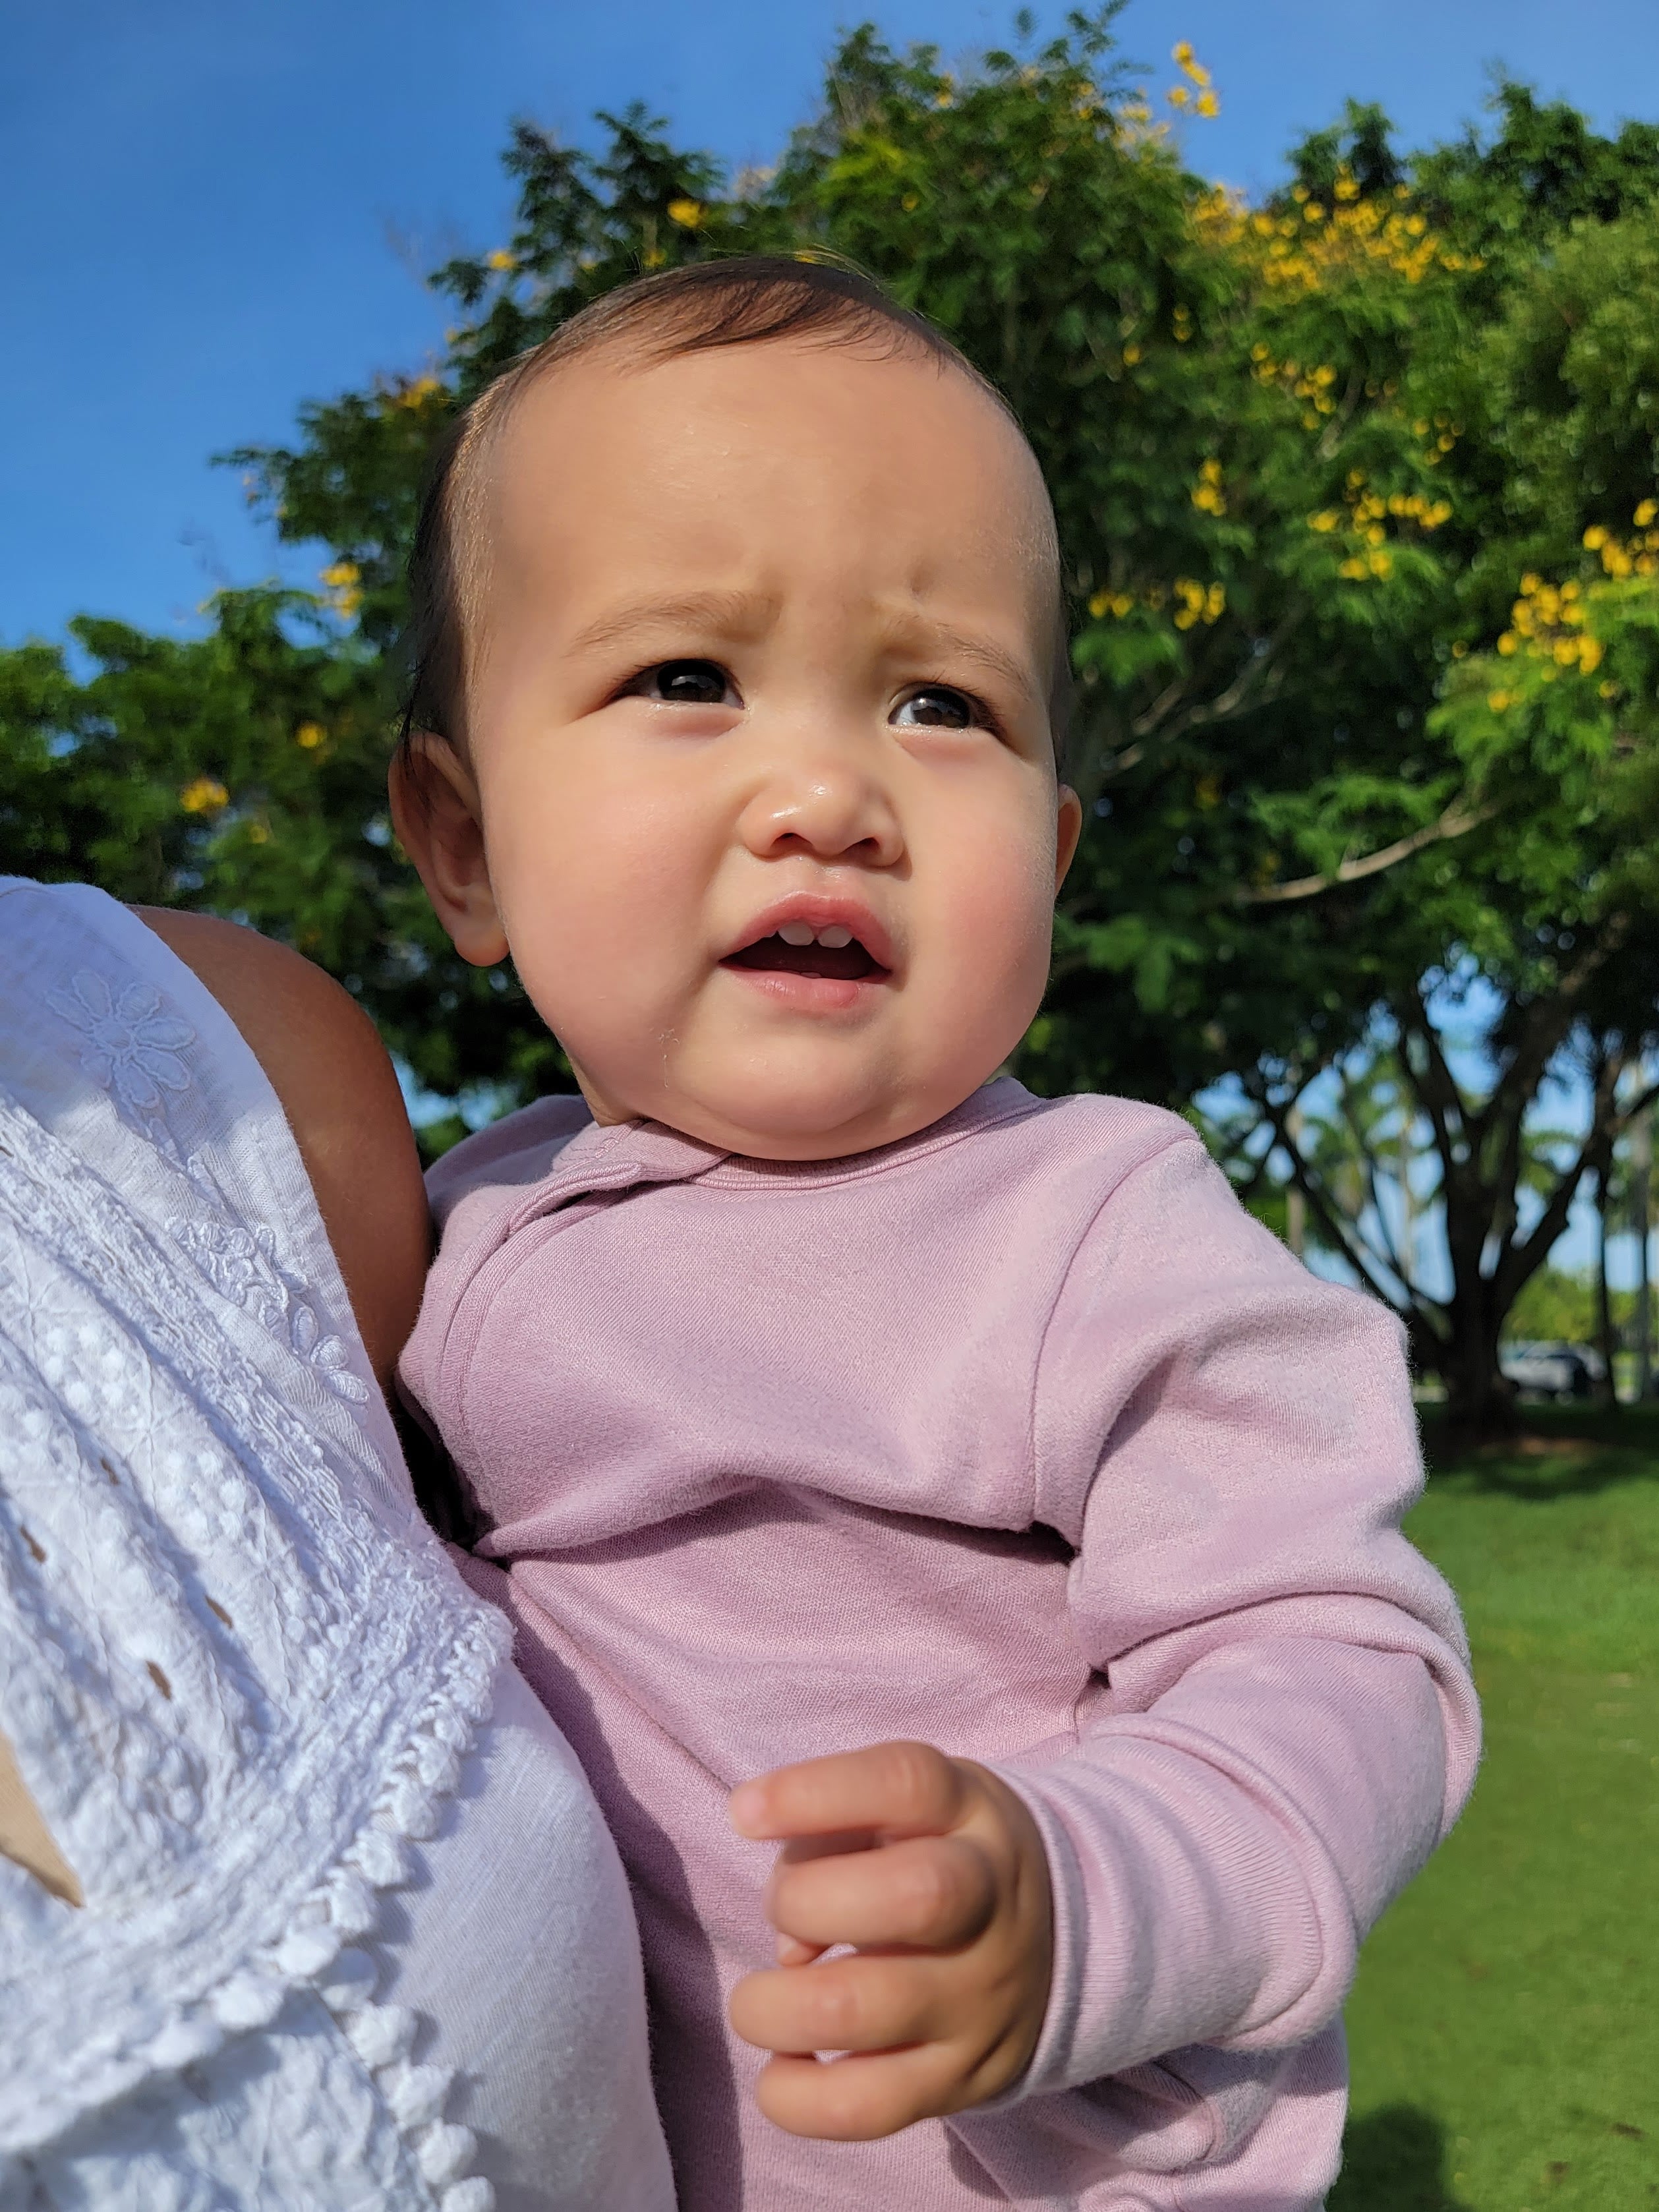 Why do babies have hiccups